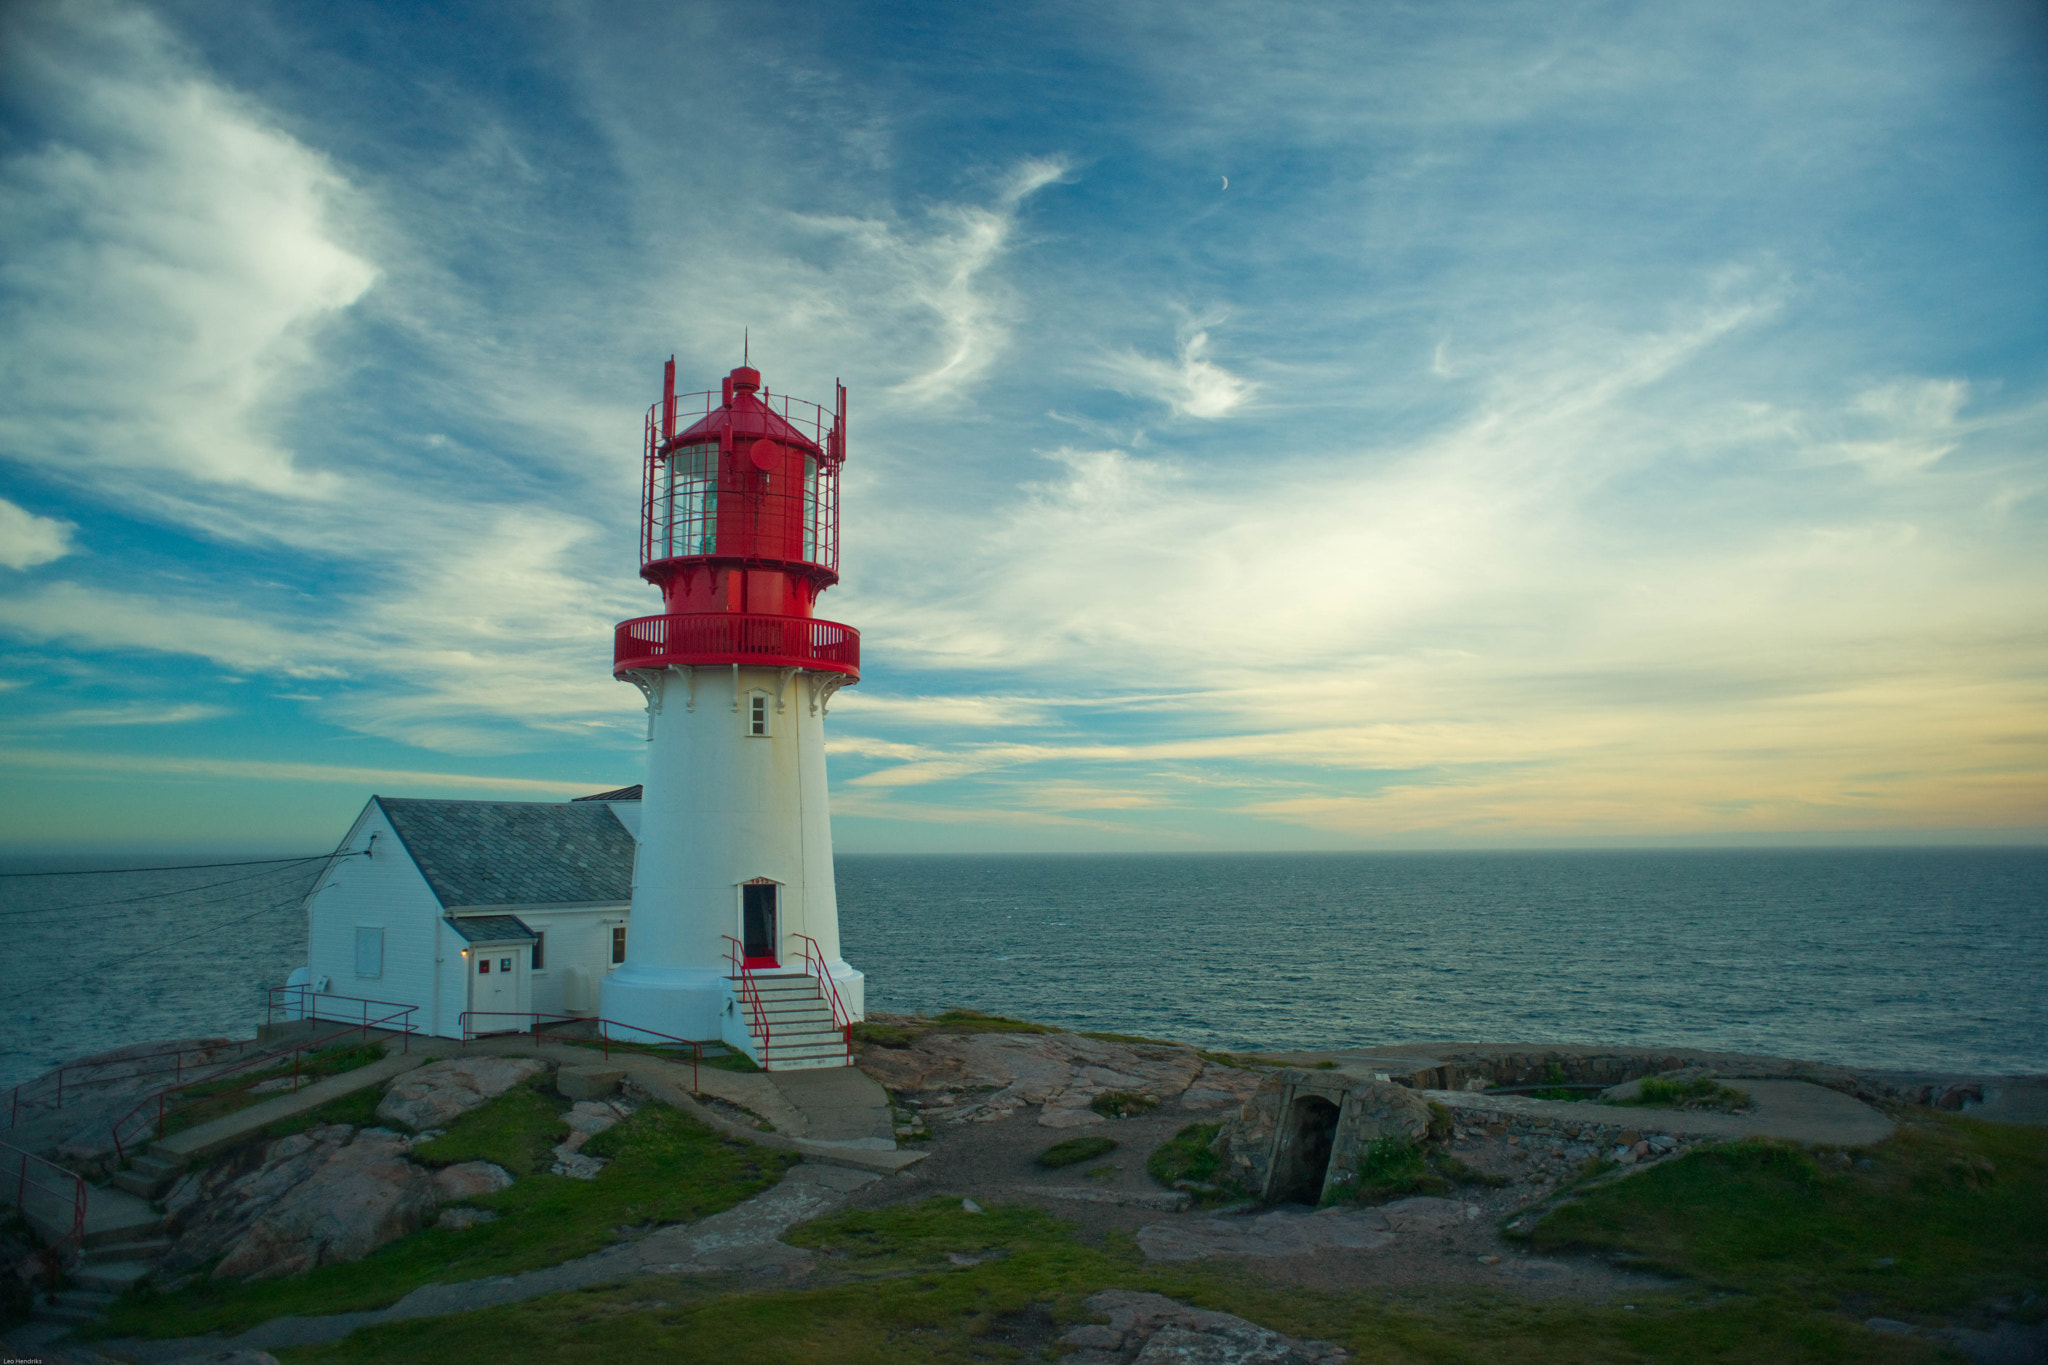 24mm F2.8 sample photo. Lindesnes lighthouse photography